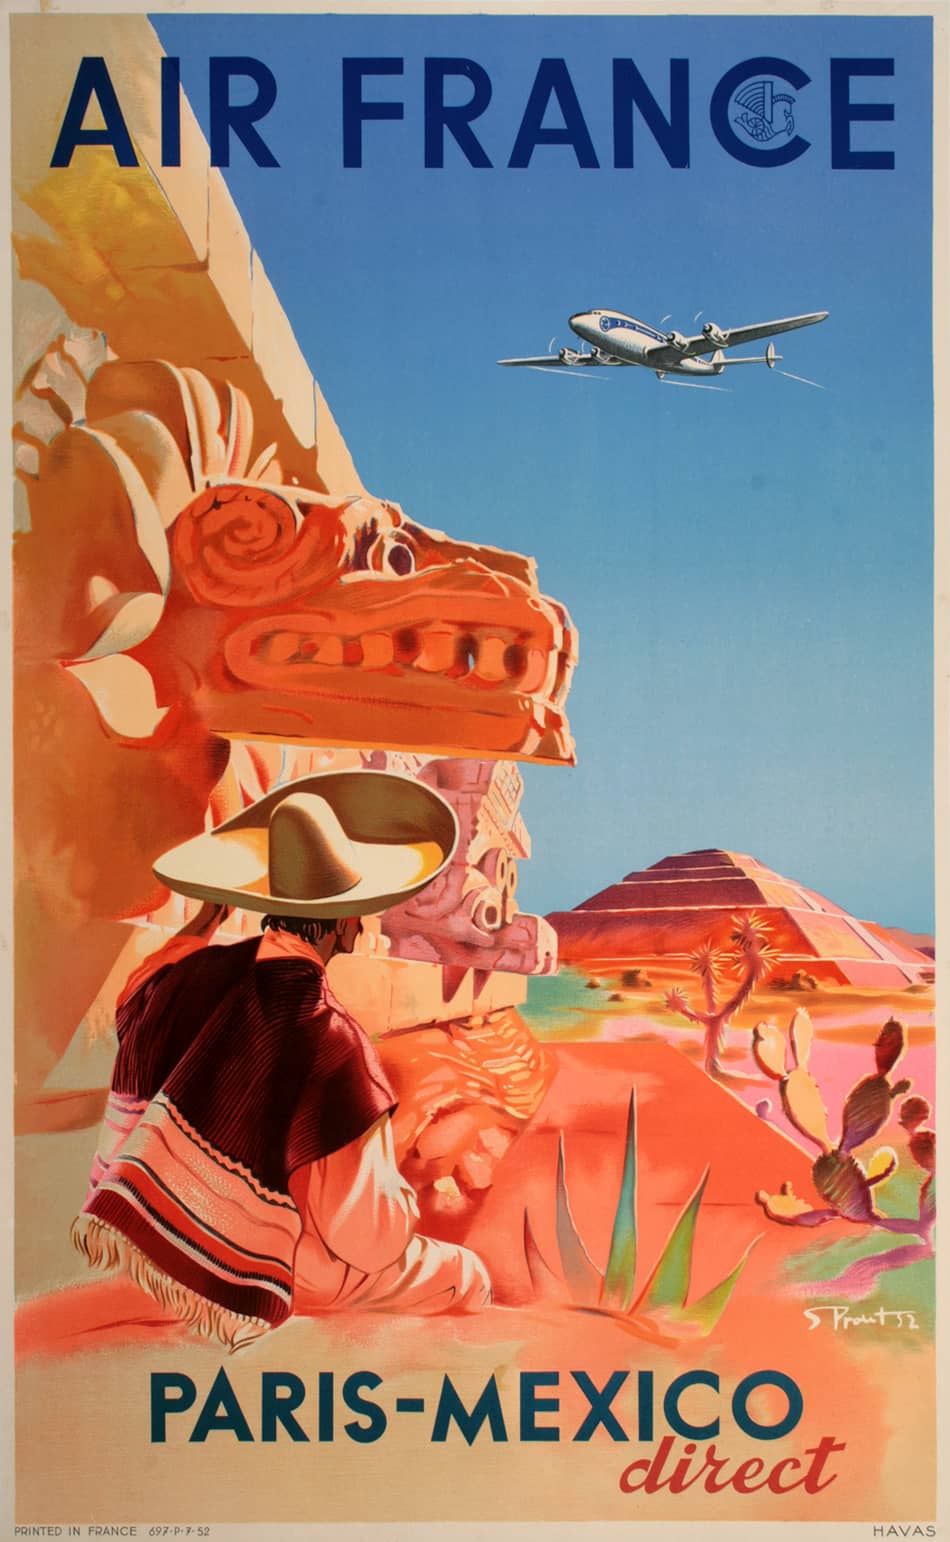 Original Air France 1952 Poster for Travel from Paris to Mexico